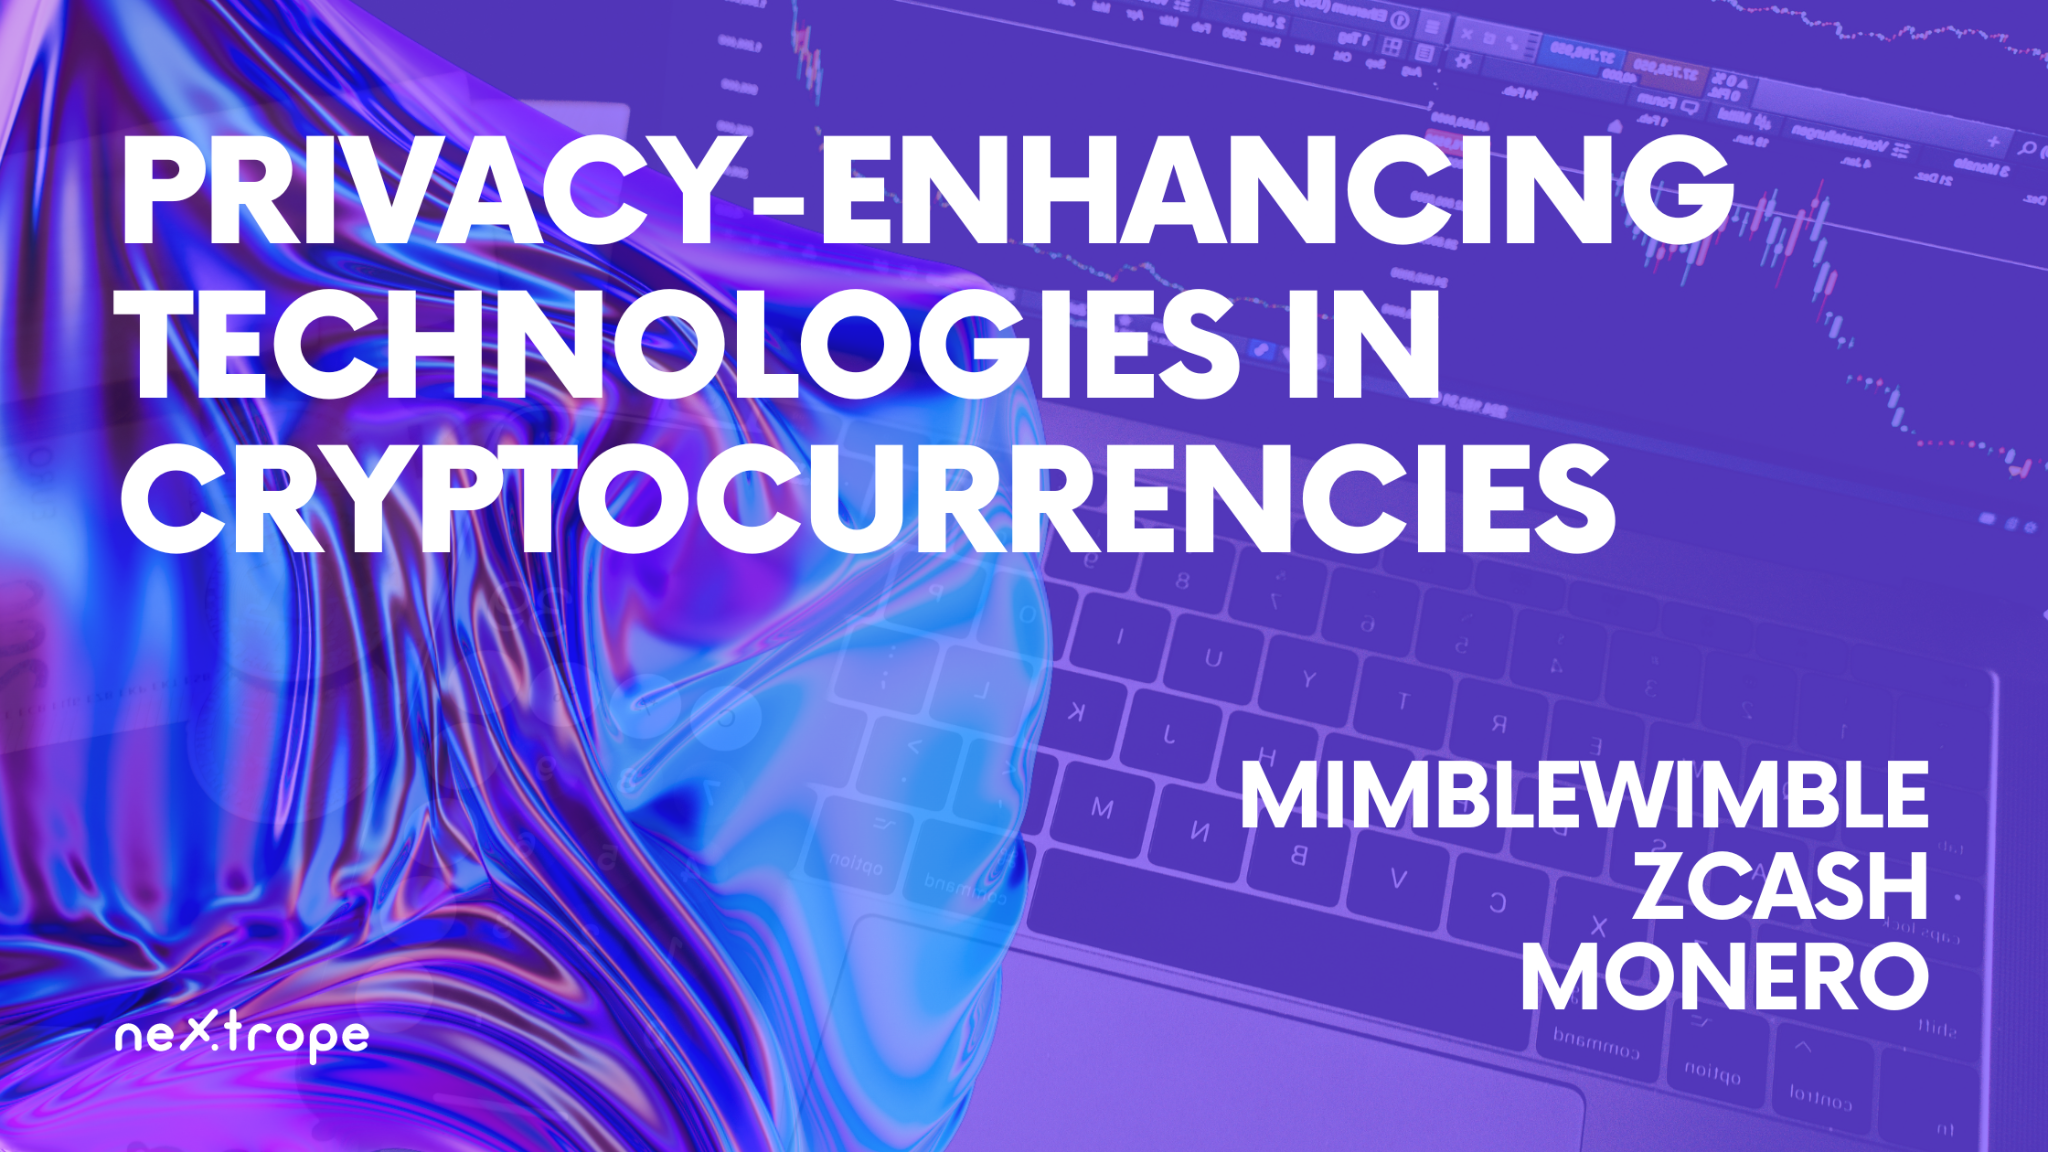 Privacy-Enhancing Technologies in Cryptocurrencies: Mimblewimble, Zcash, and Monero